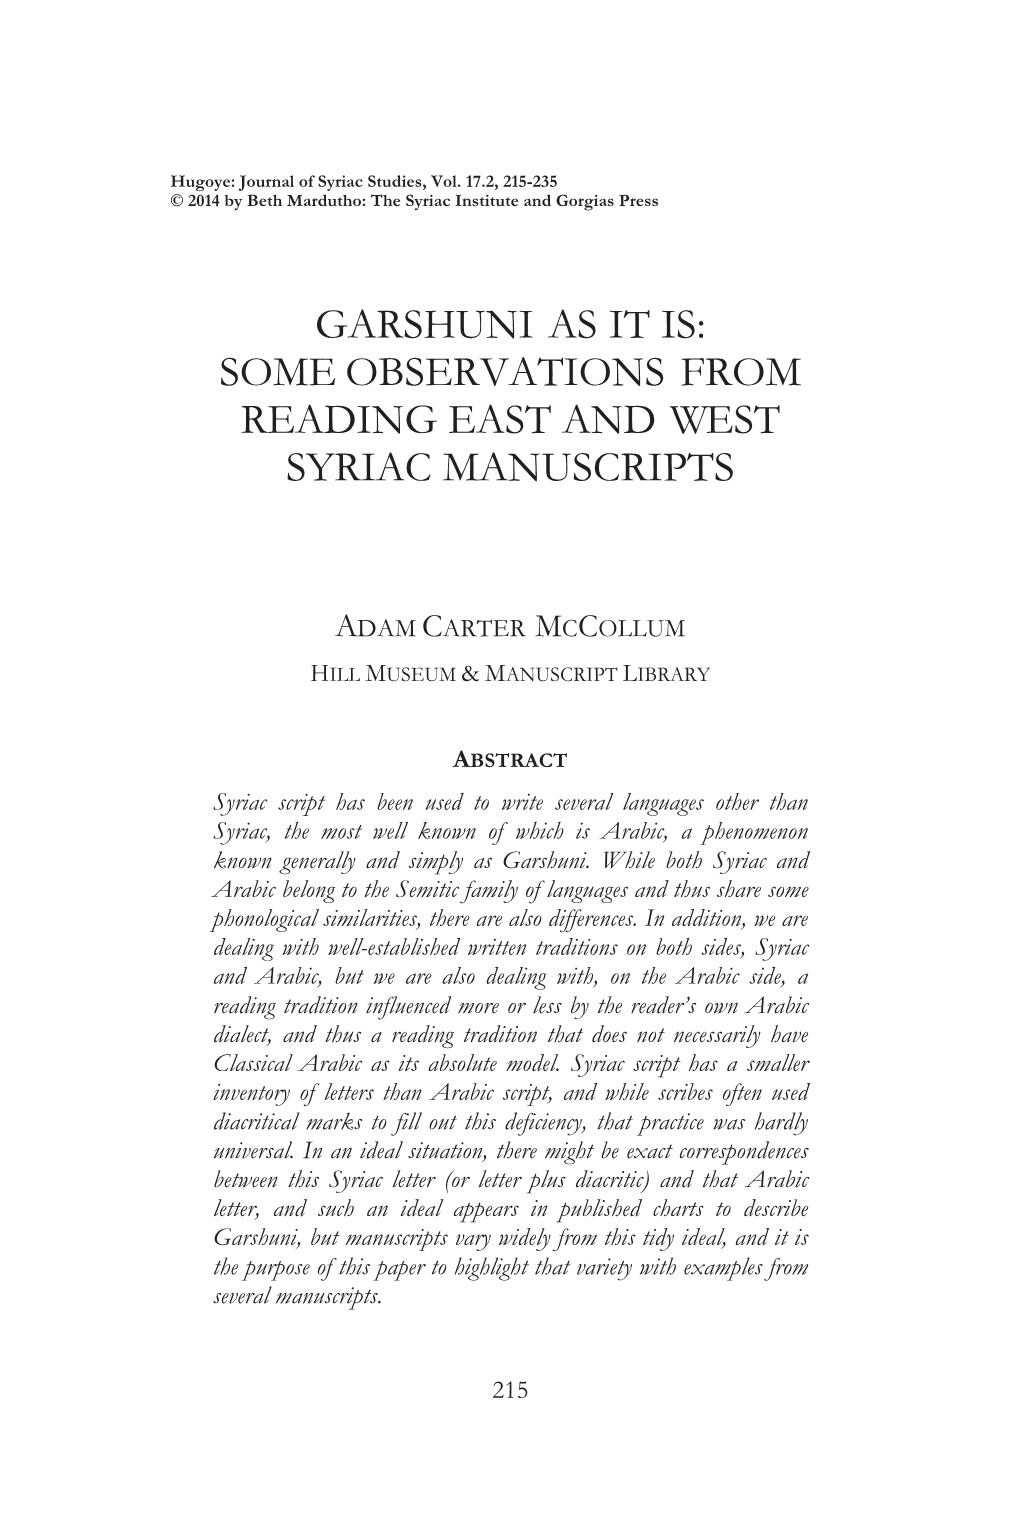 Garshuni As It Is: Some Observations from Reading East and West Syriac Manuscripts